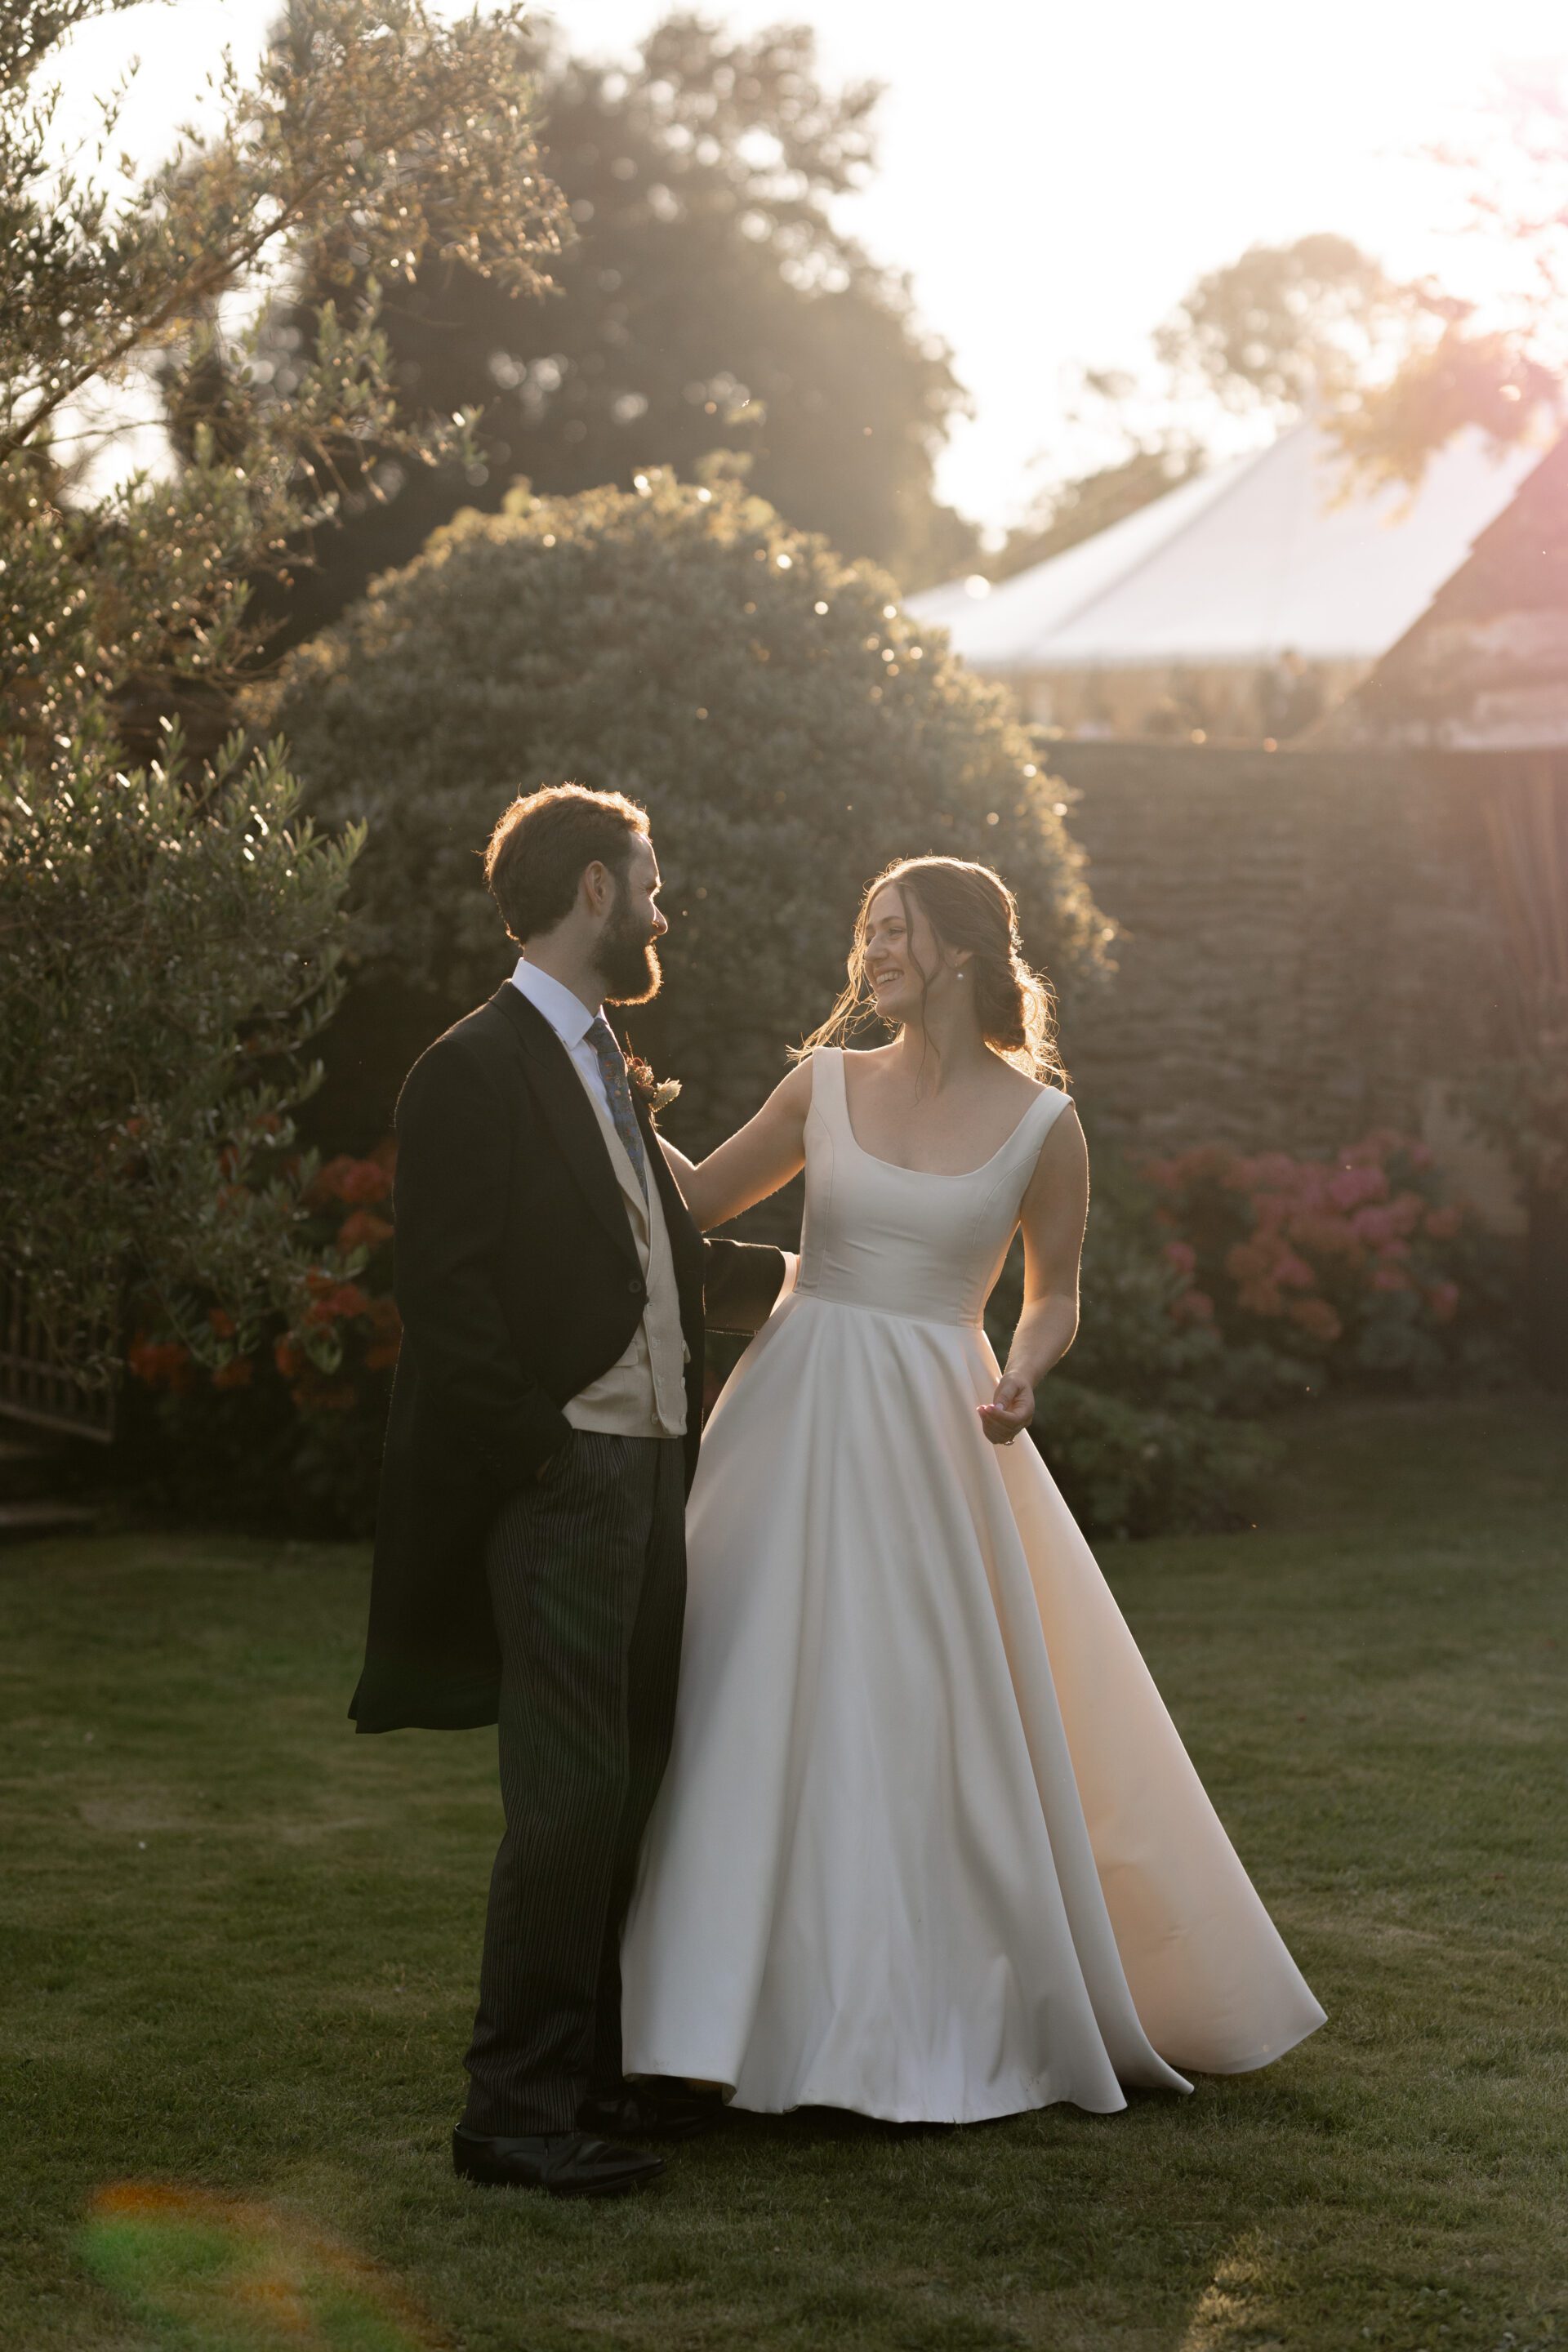 Golden hour couples portraits at the Somerset marquee wedding